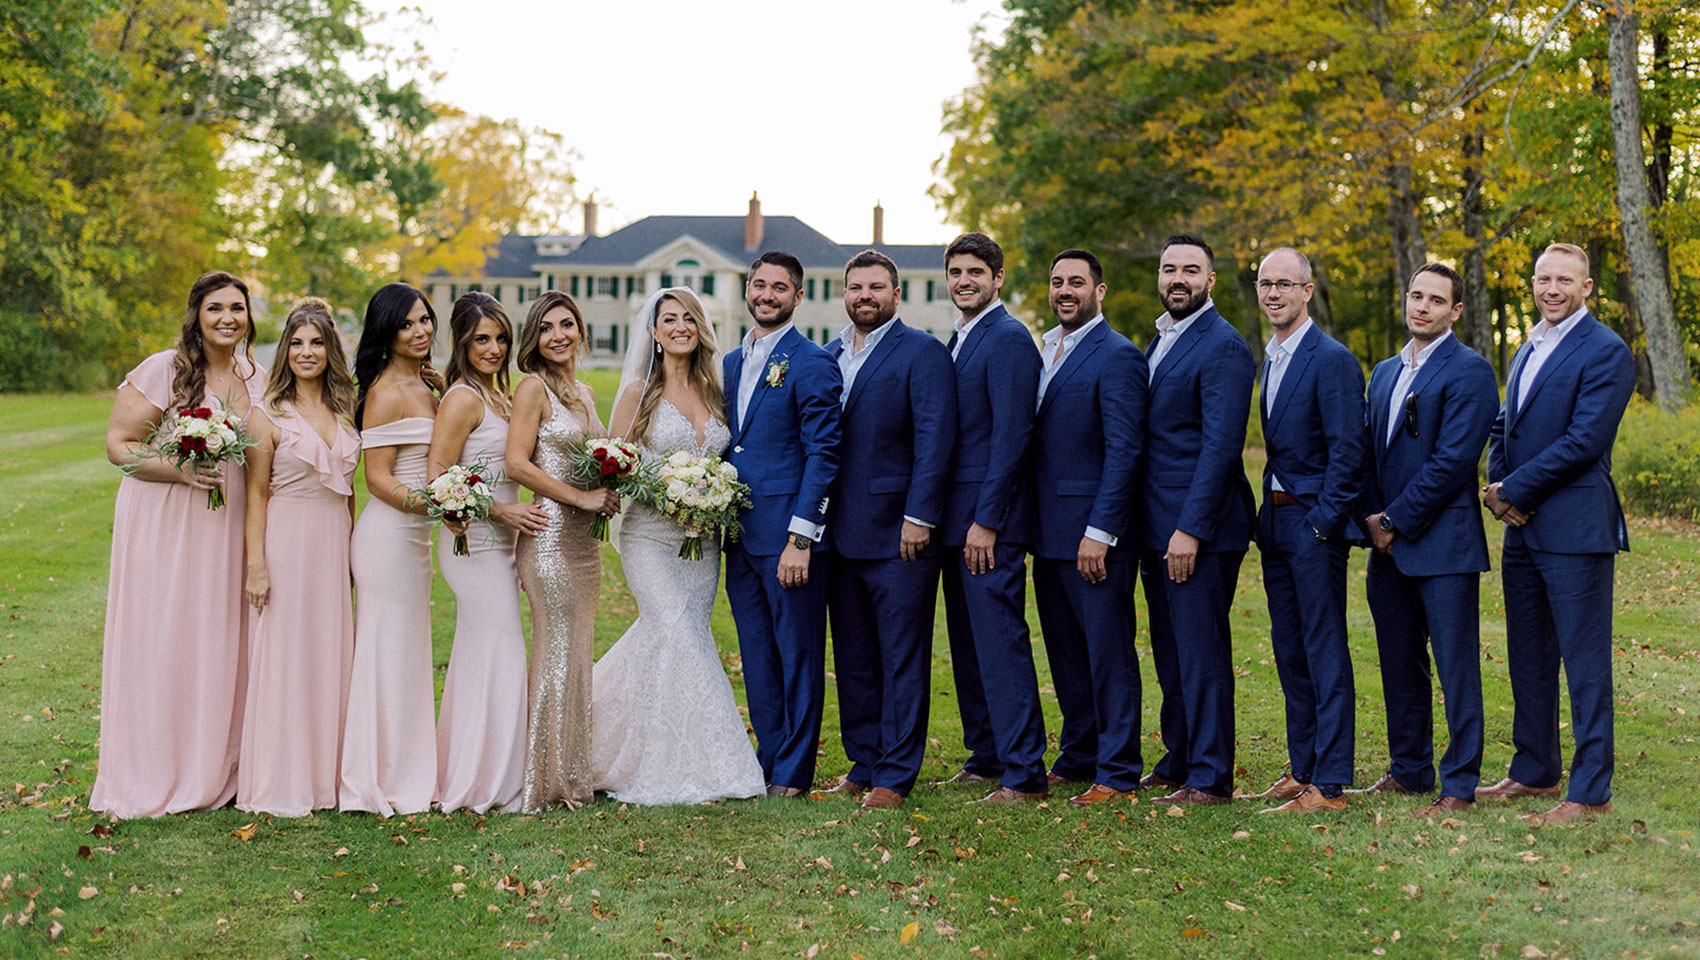 Bridal party posing in front of Kimpton Taconic Hotel